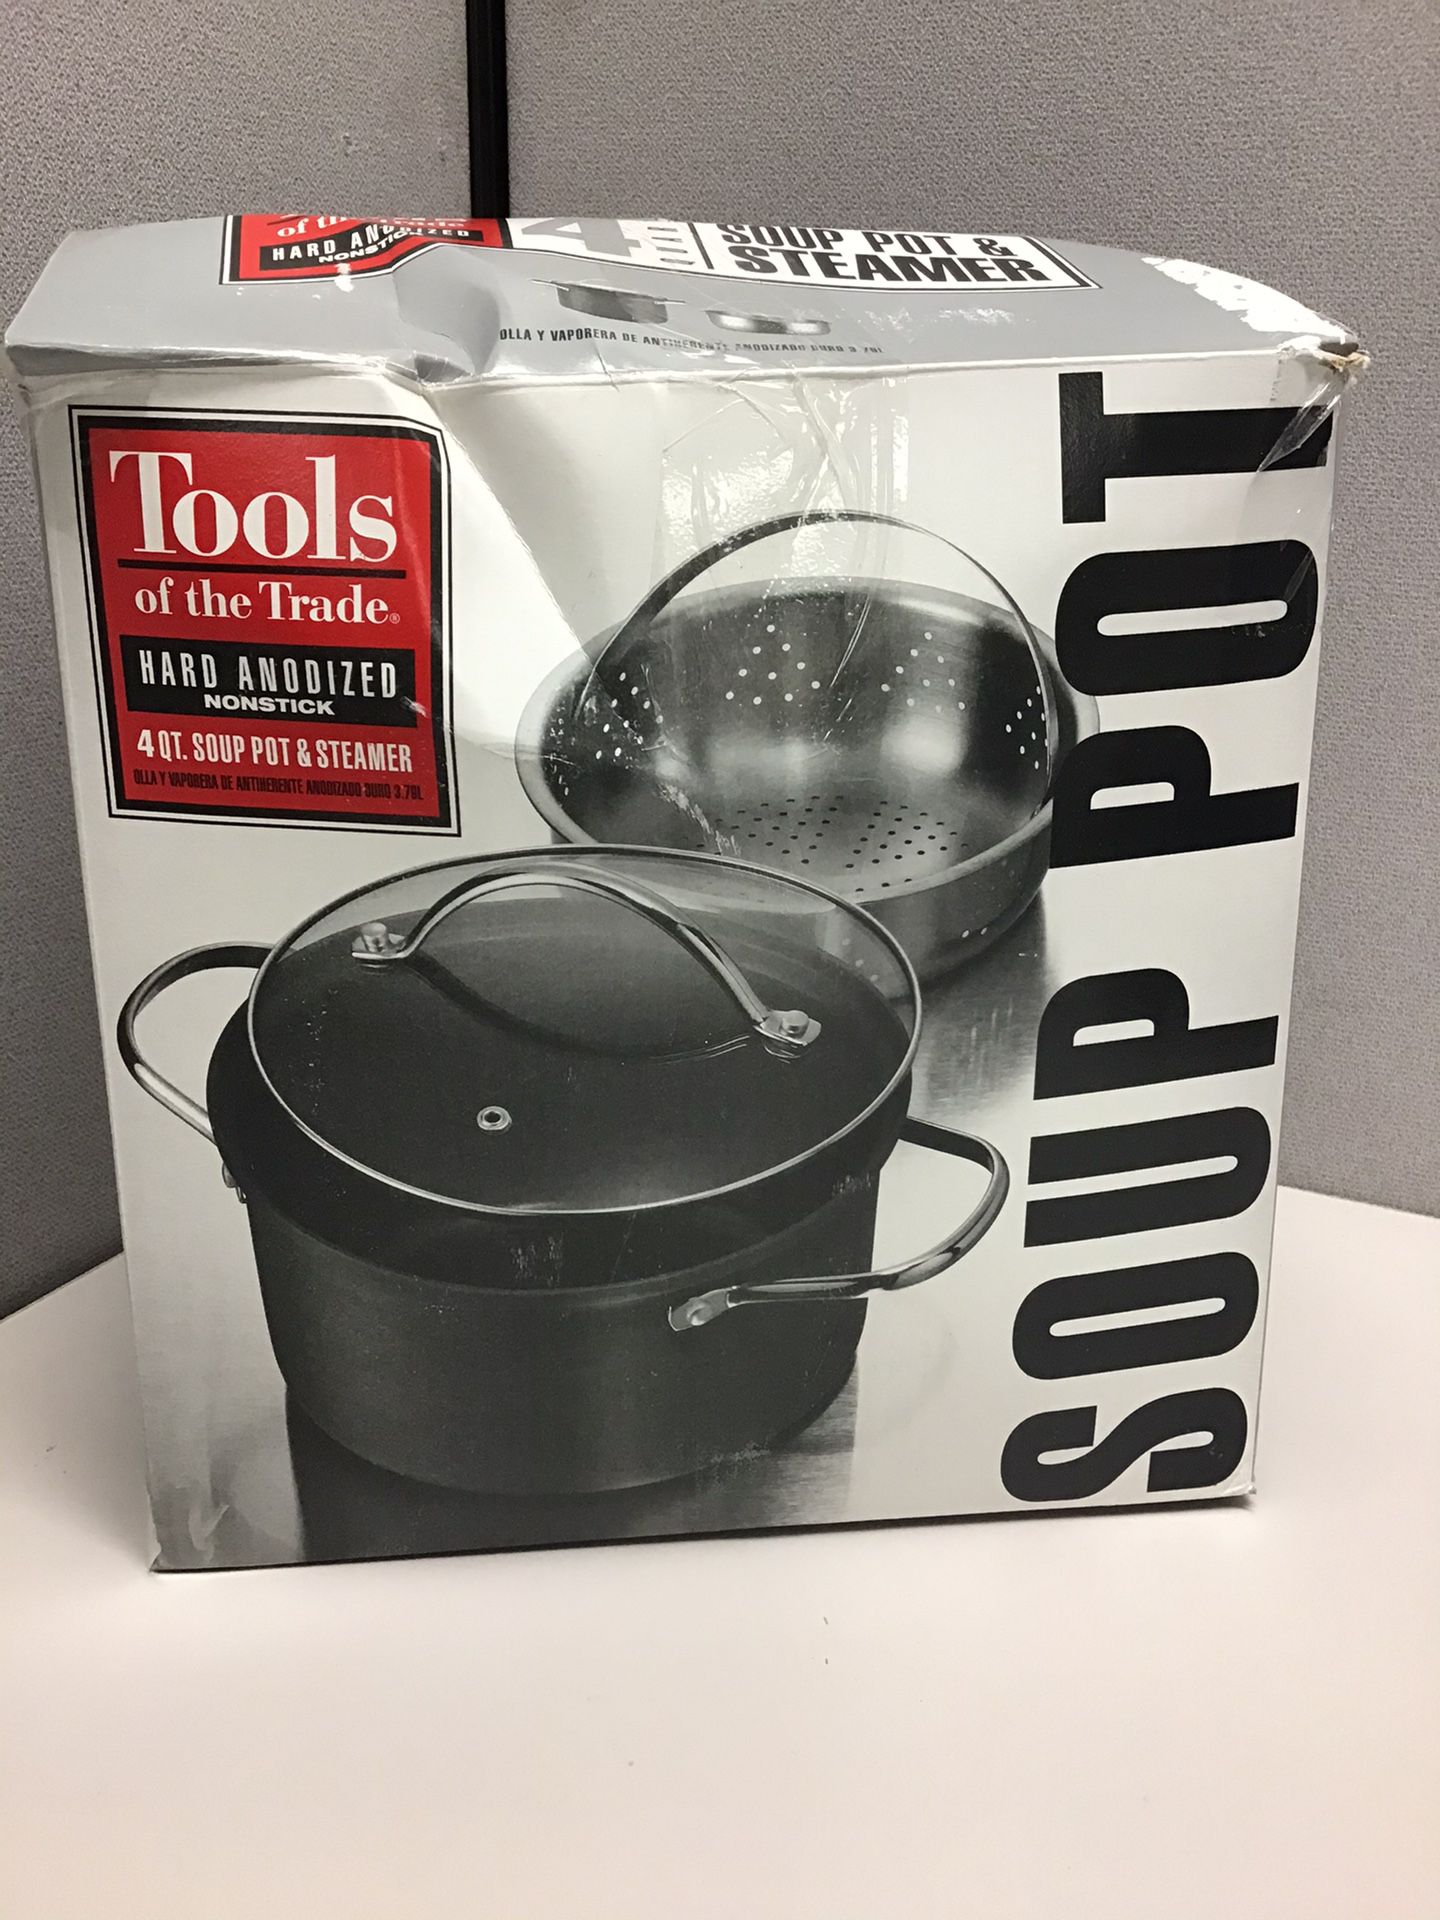 Tools Of the Trade soup pot & steamer